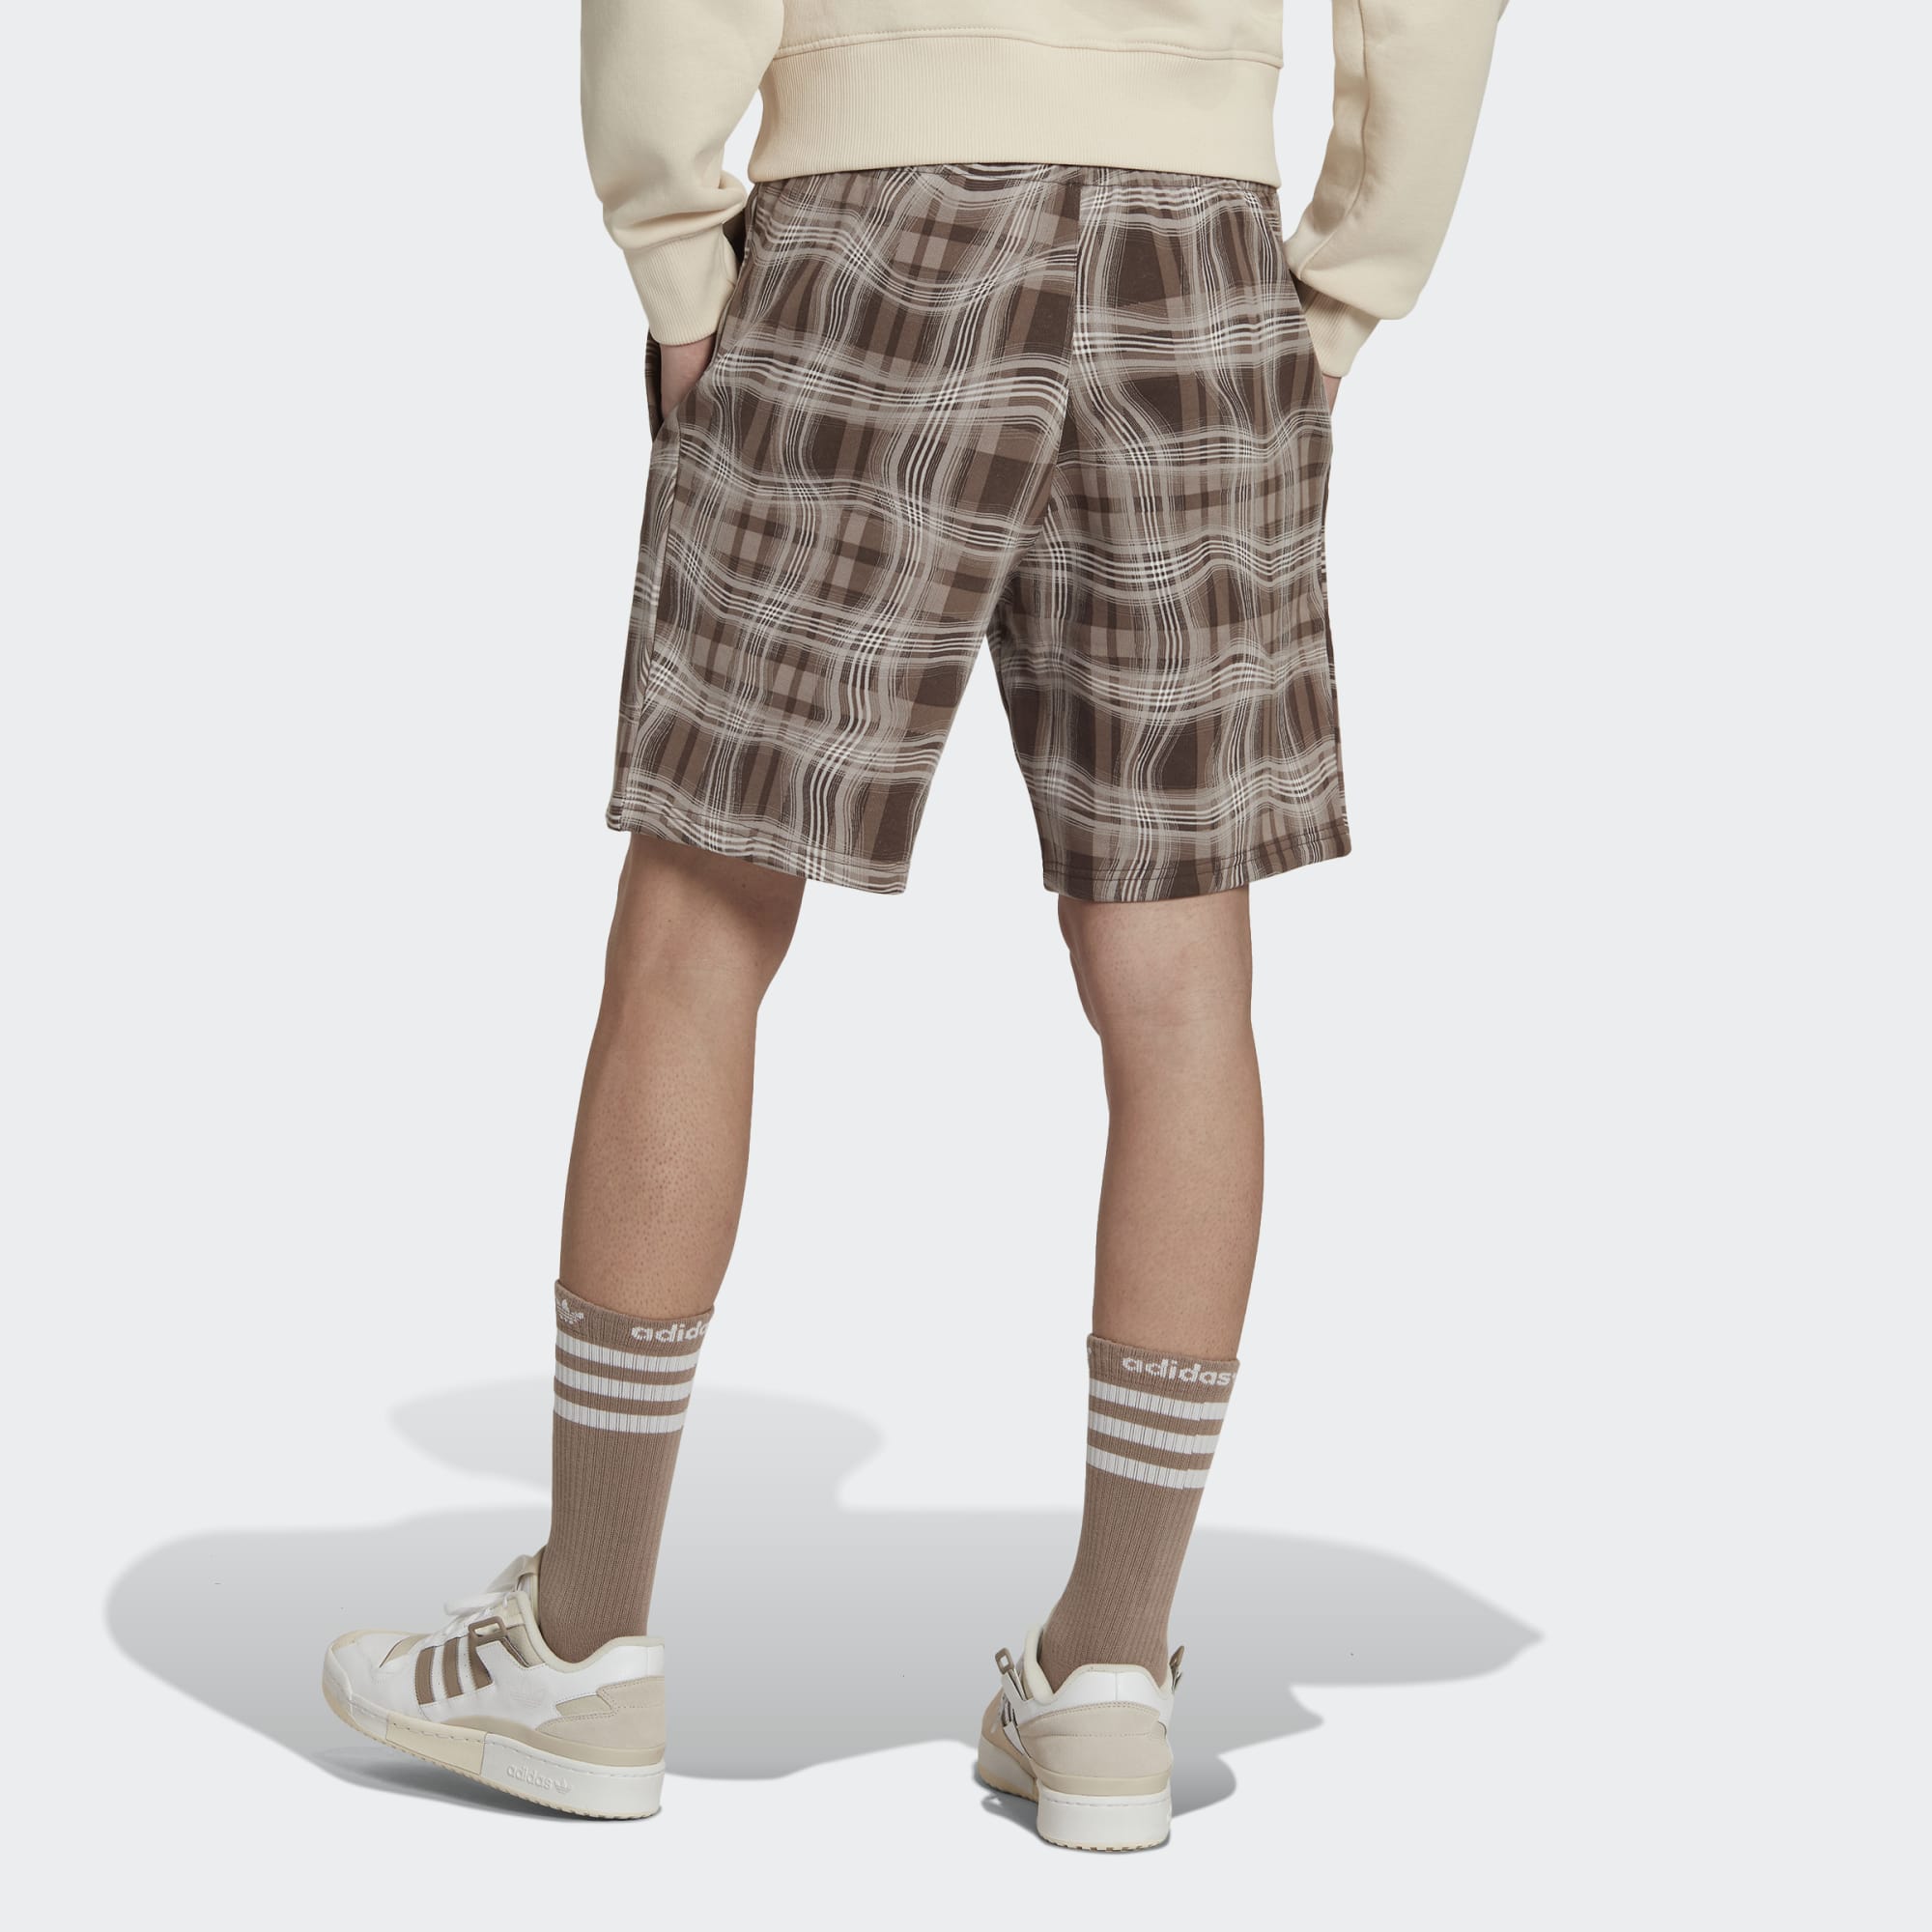 Reds Puffer AOP Plaid Adidas - Chalky Brown Short